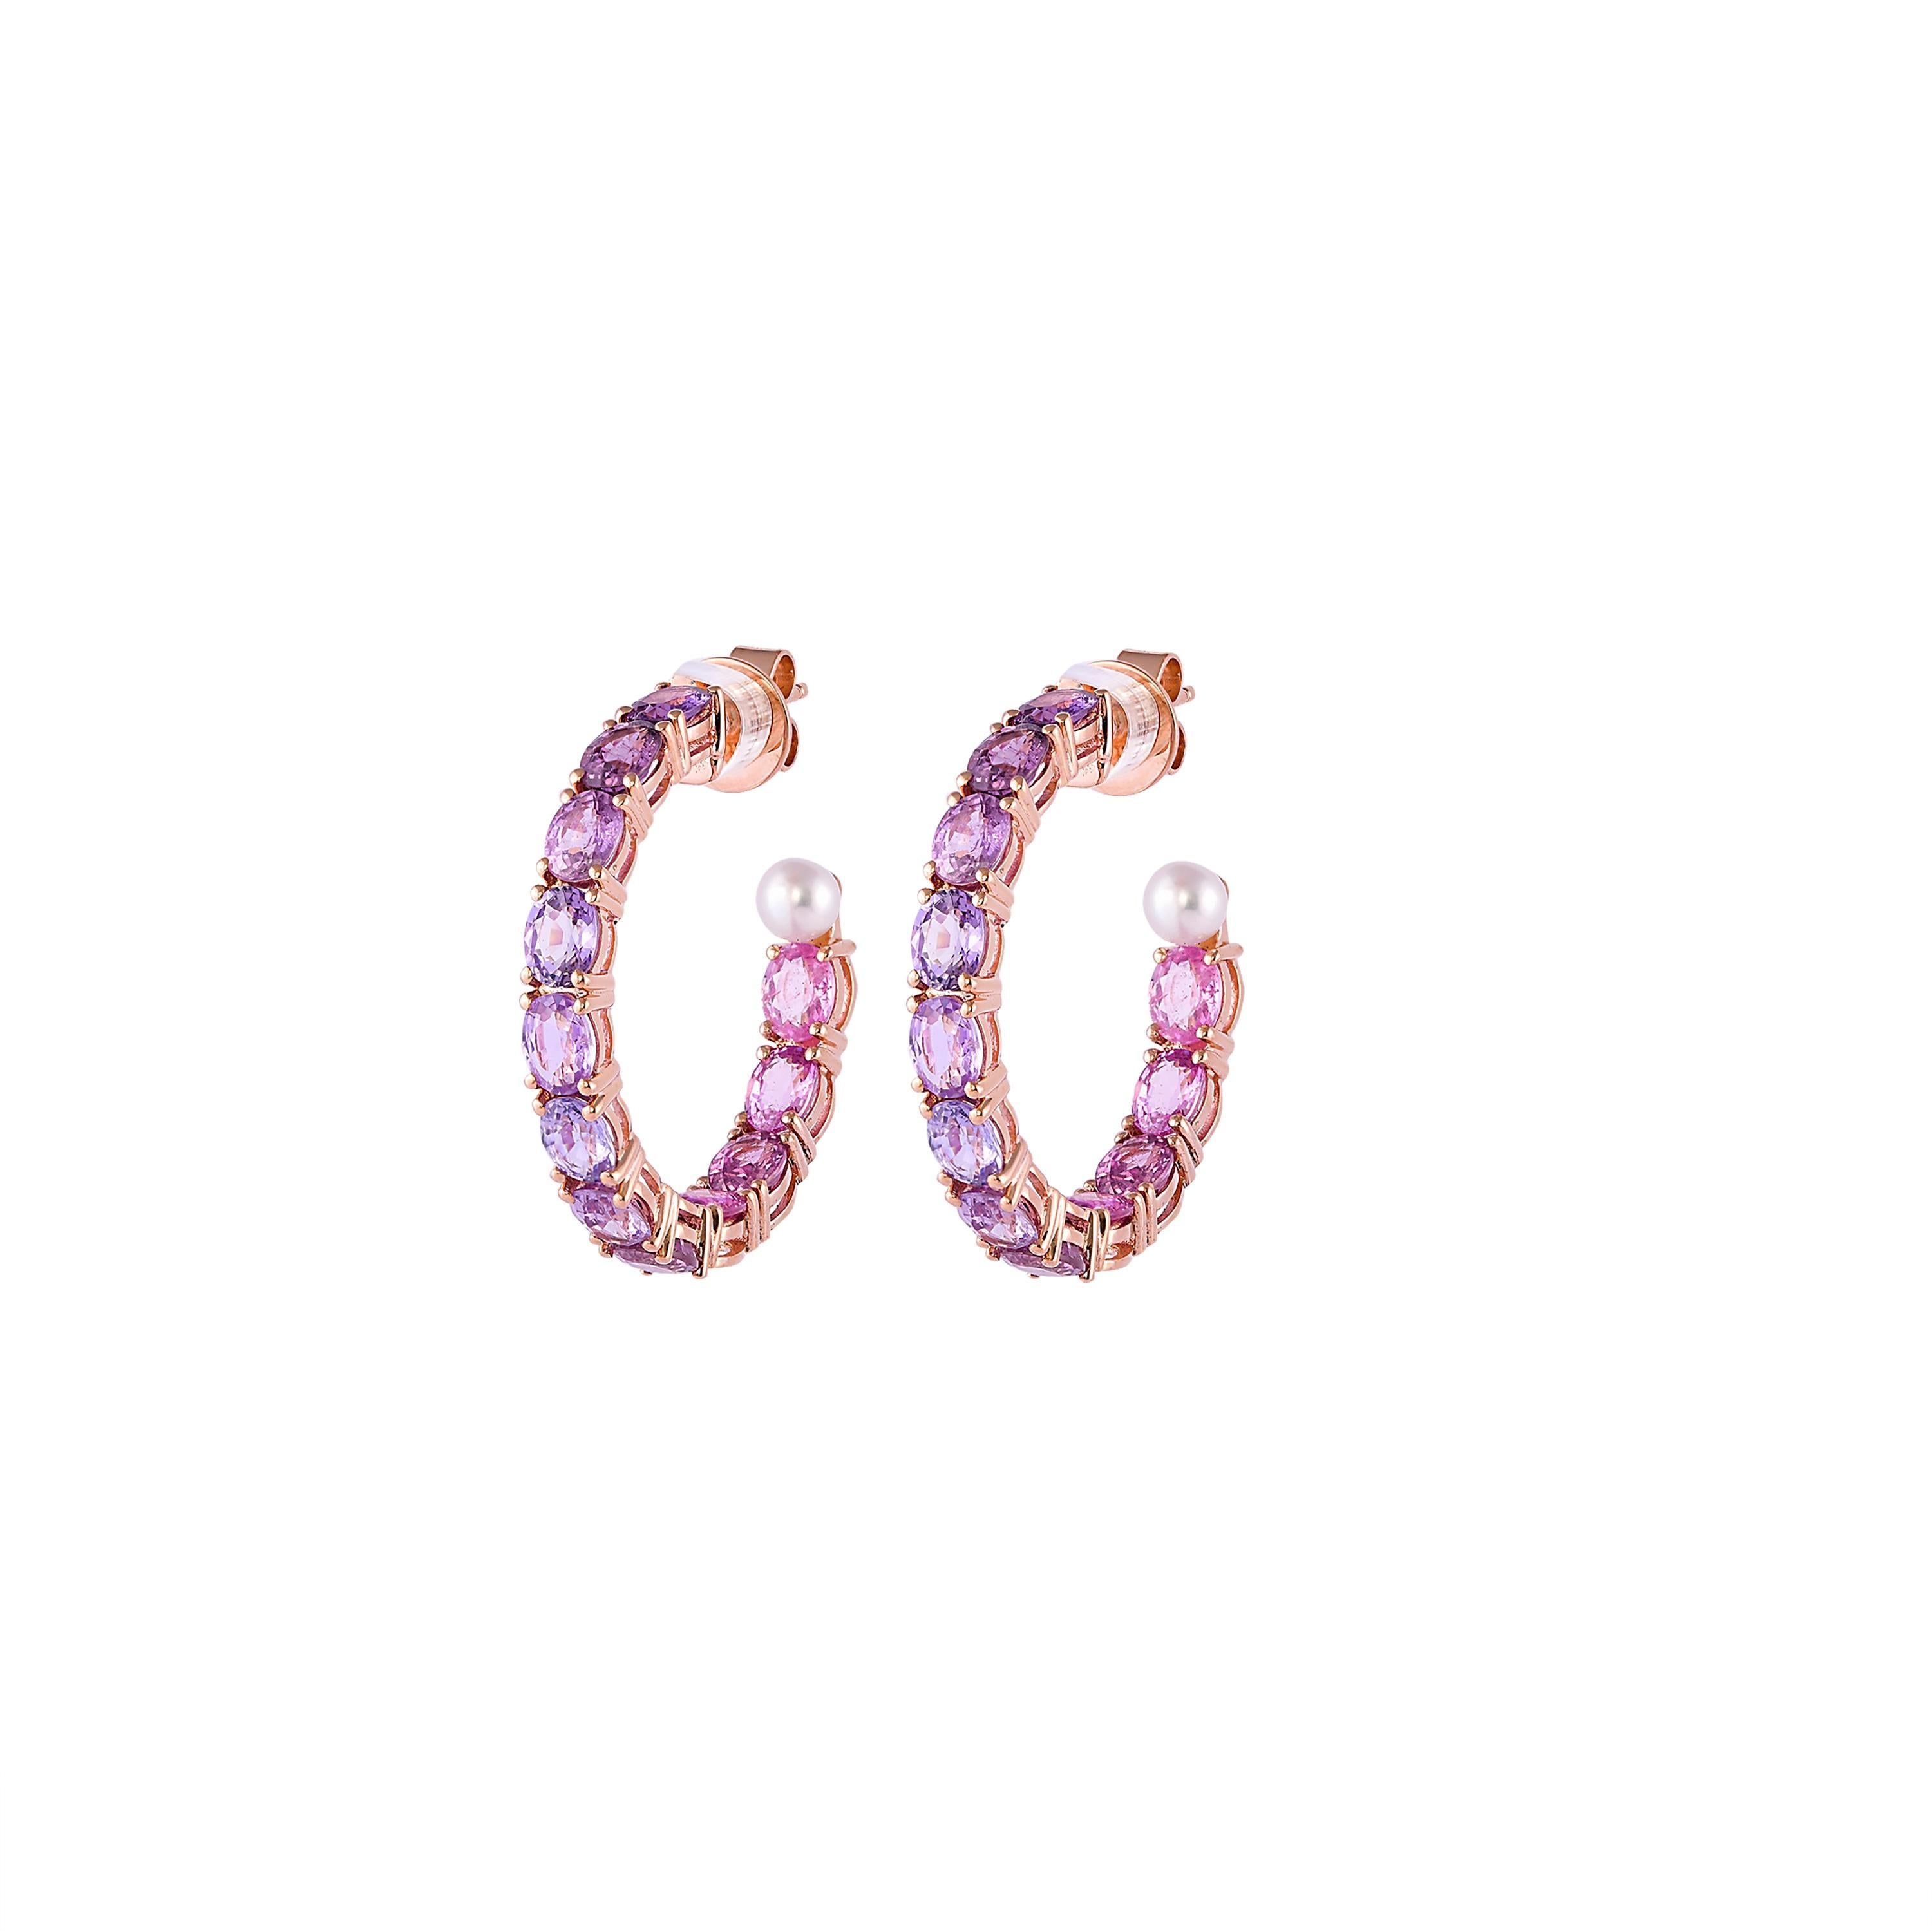 Sunita Nahata presents a collection of simple, classic and dainty sapphire earrings. These earrings in particular feature sparkling purple sapphire hoops with an elegant pearl to accent the gemstones. These are light and comfortable and are suitable